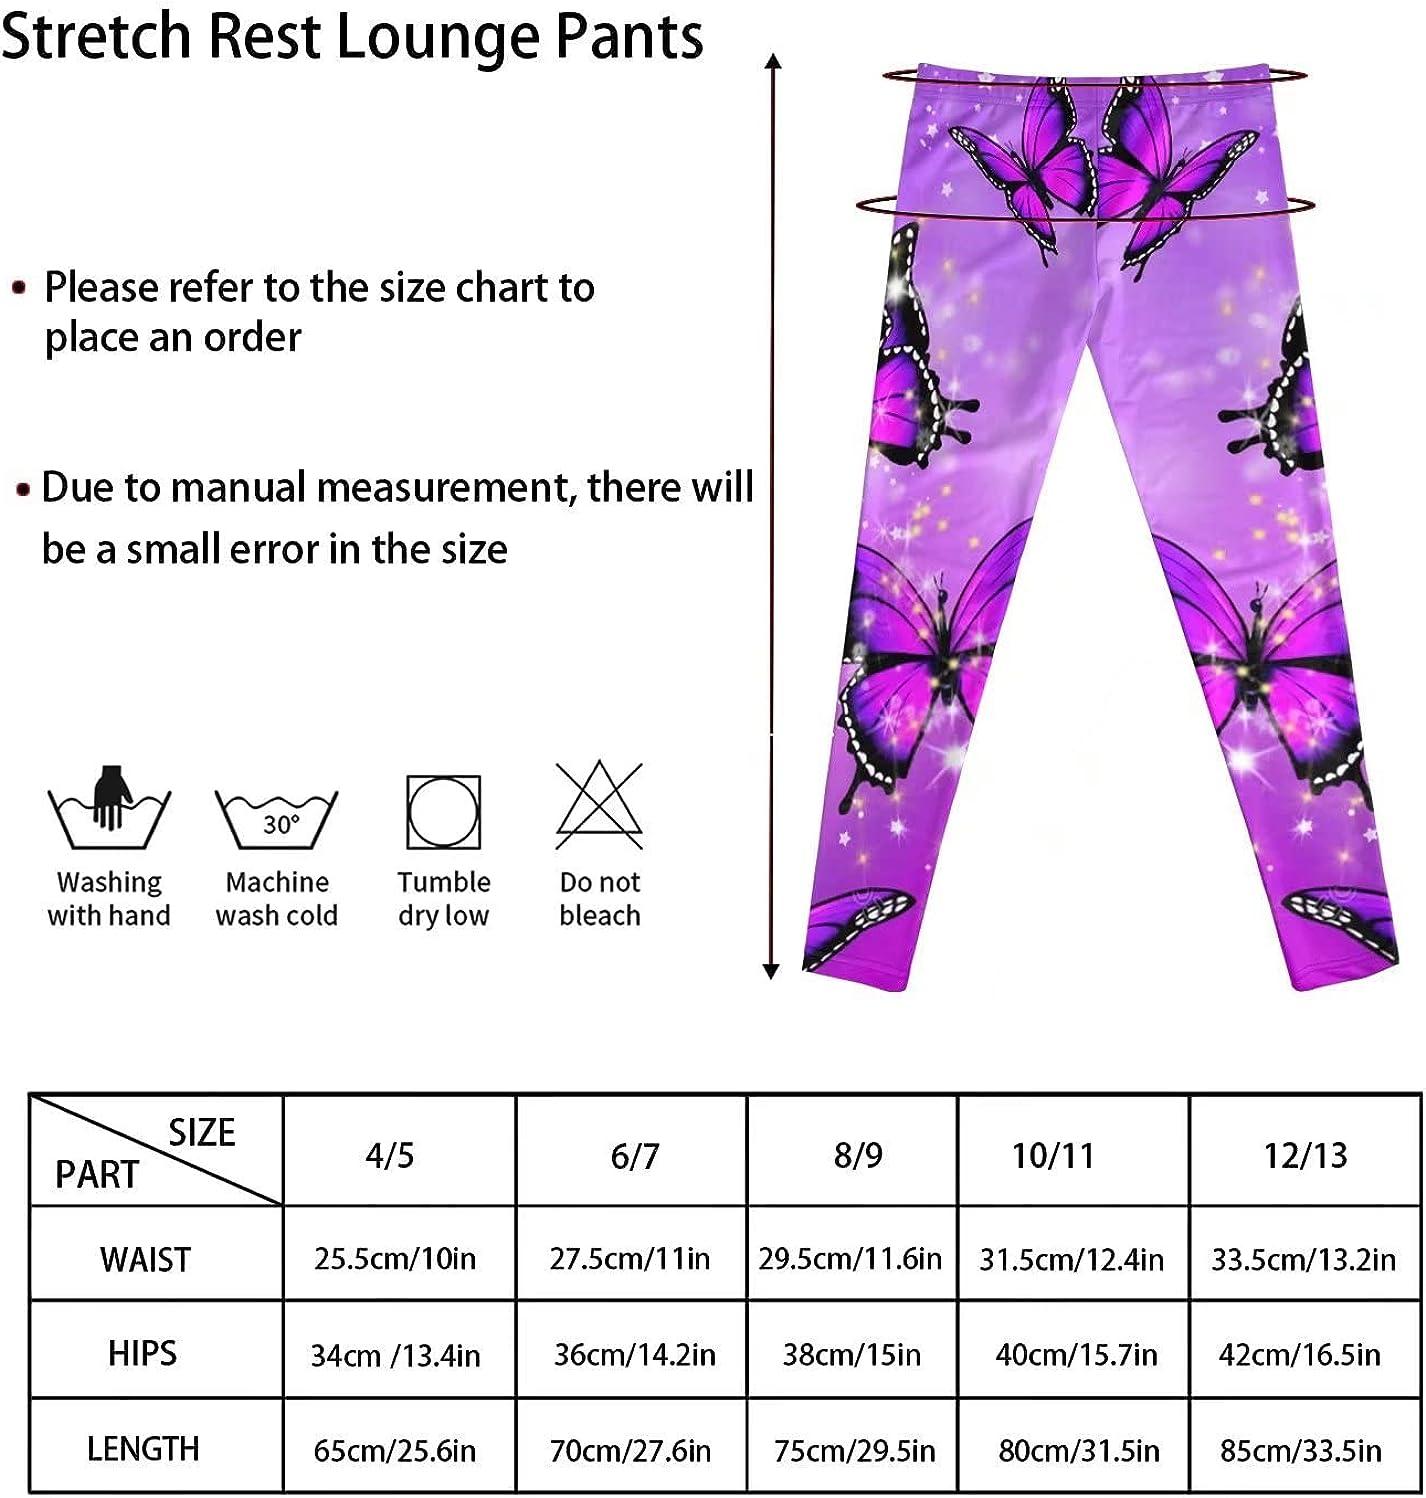 NDISTIN Lightweight Yoga Pants Girls Leggings Girls Sport Pants Tall Length Athletic  Leggings with Polyester Bling Butterfly Small